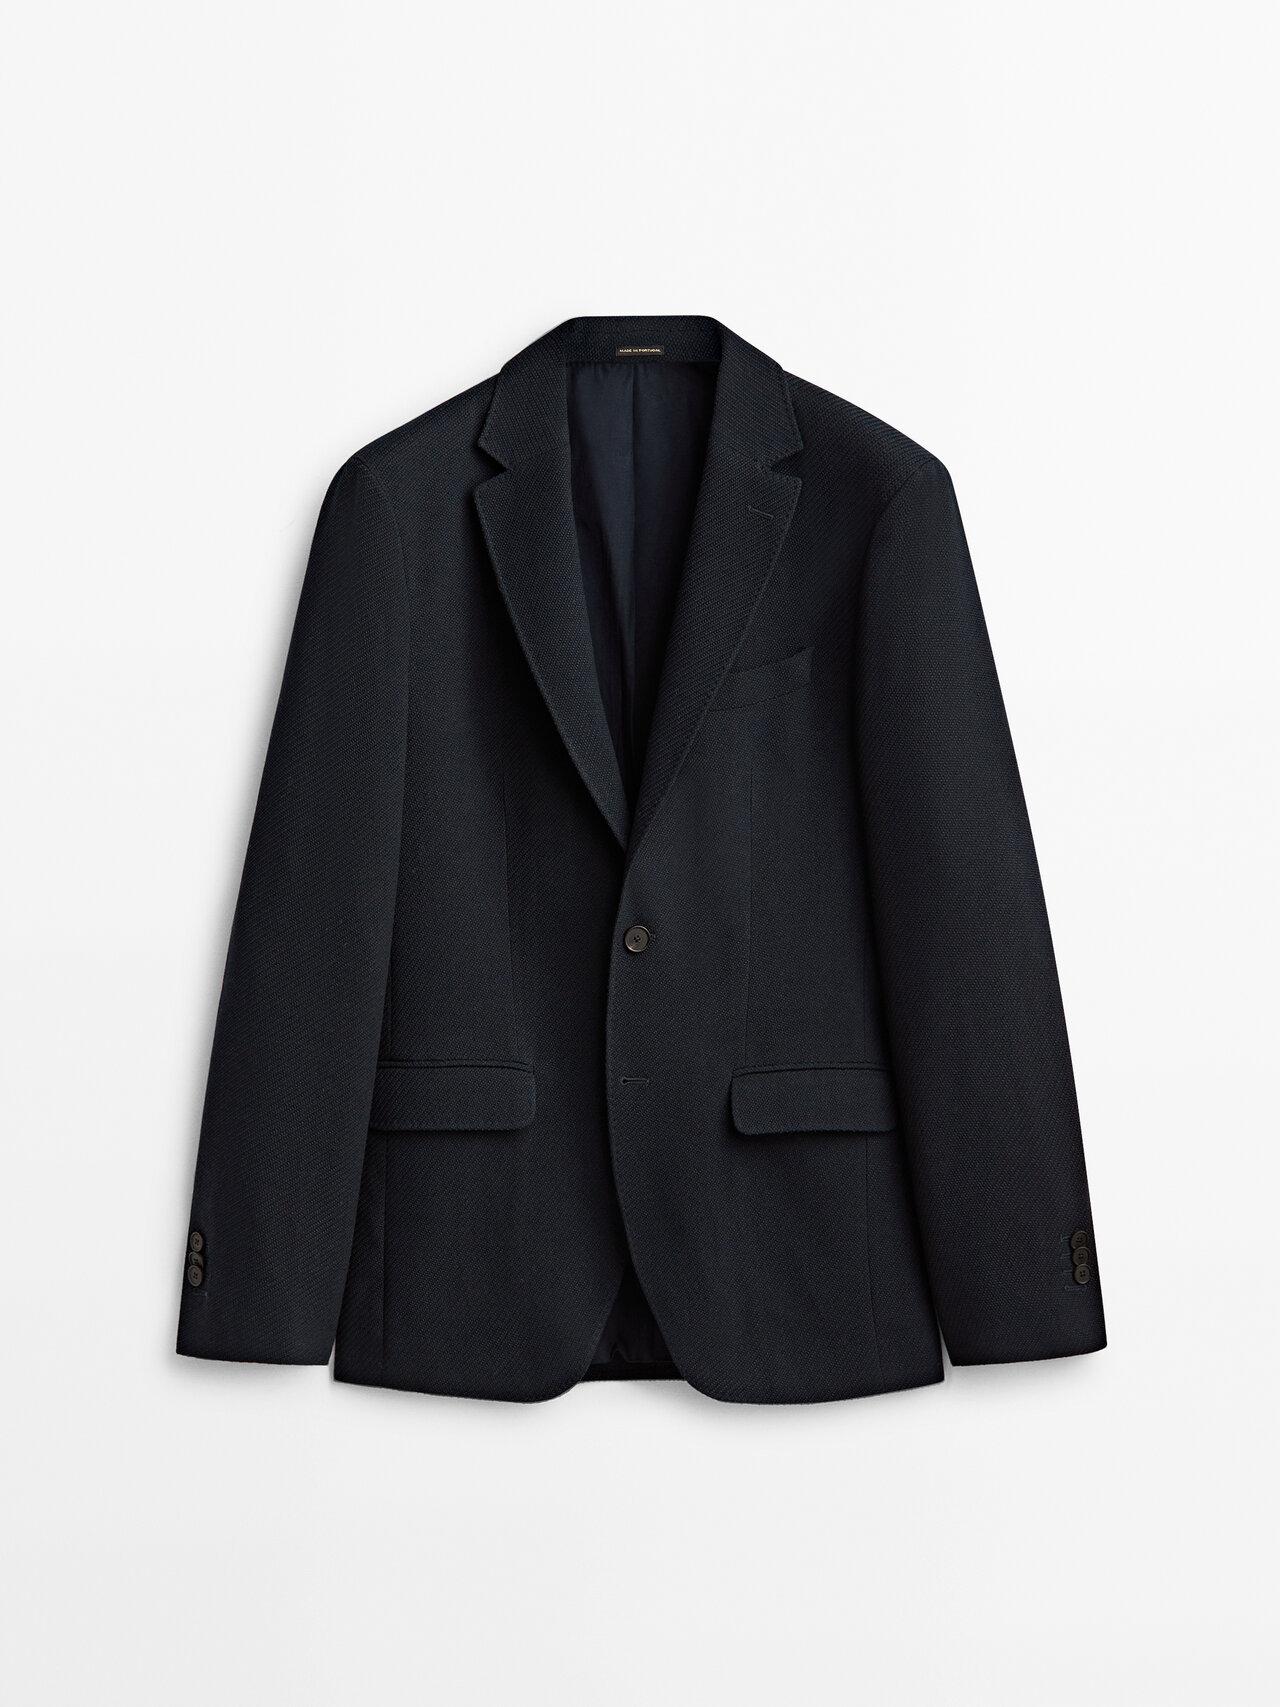 MASSIMO DUTTI Navy Blue Wool Blazer With Diagonal Fabric for Men | Lyst